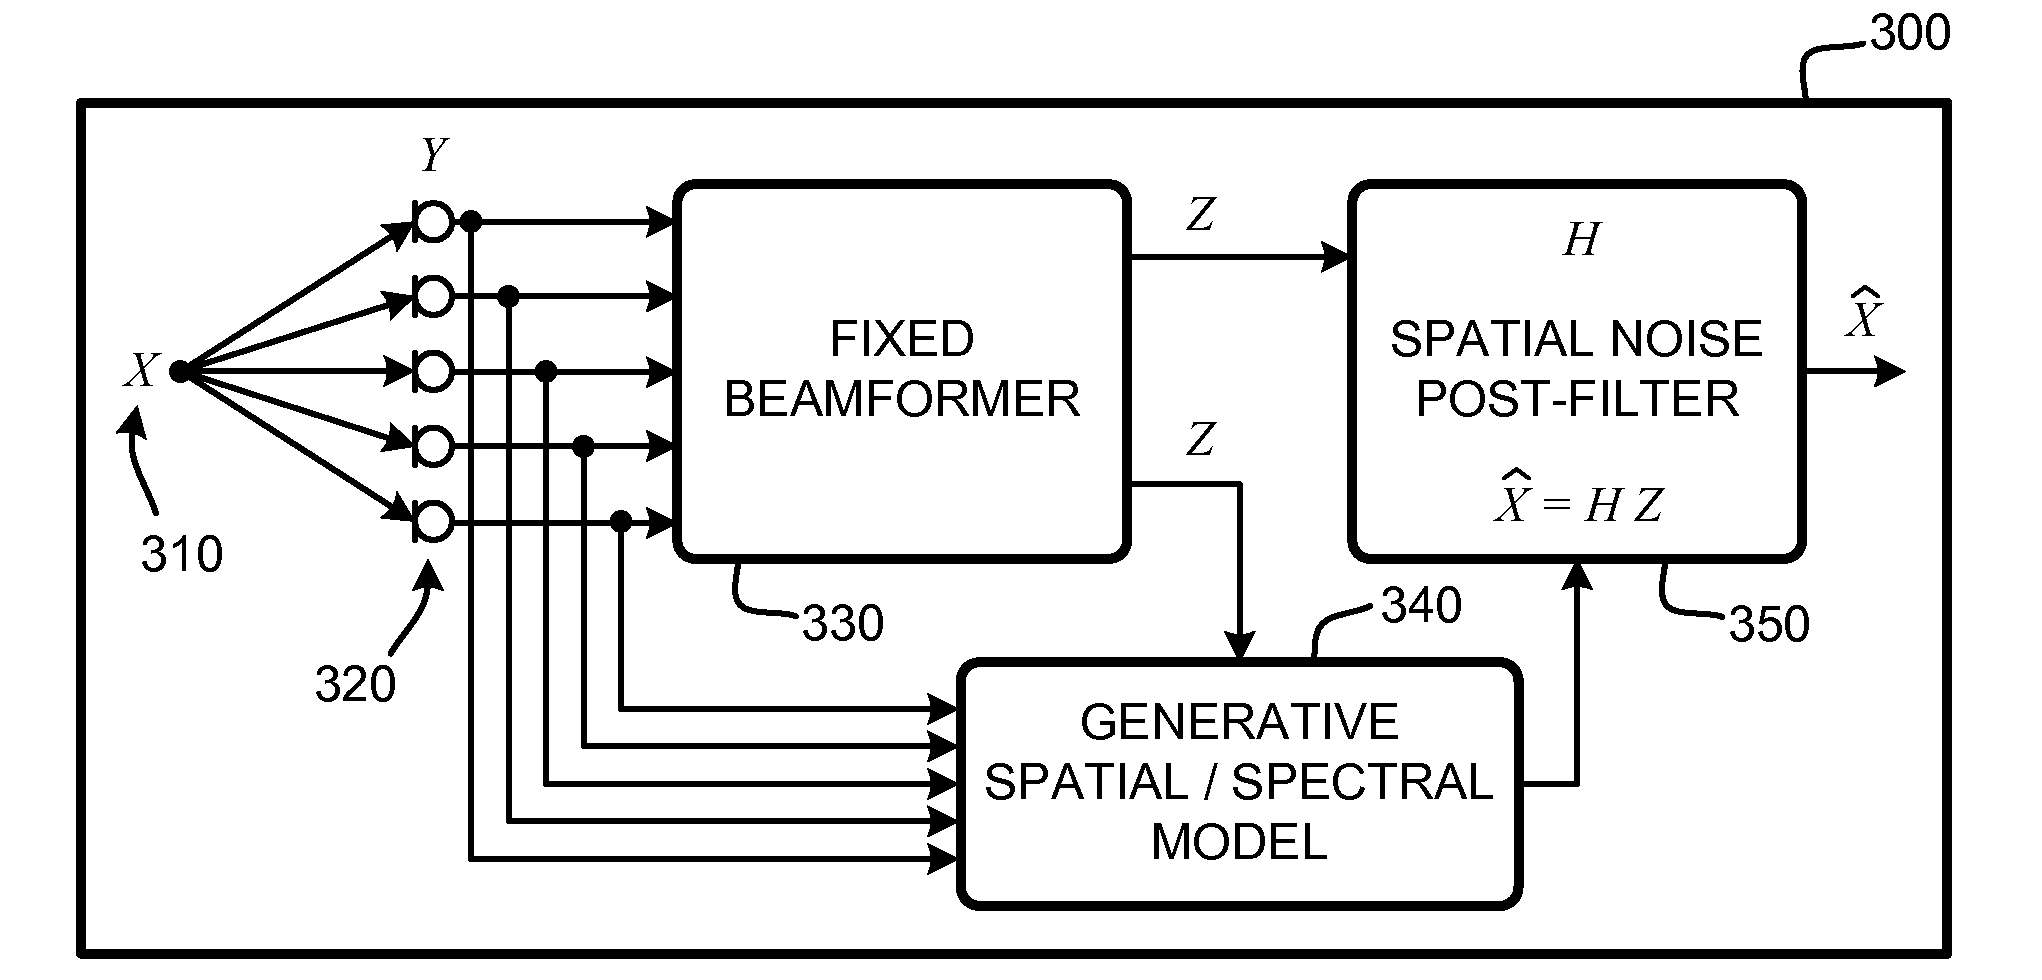 Sensor array post-filter for tracking spatial distributions of signals and noise